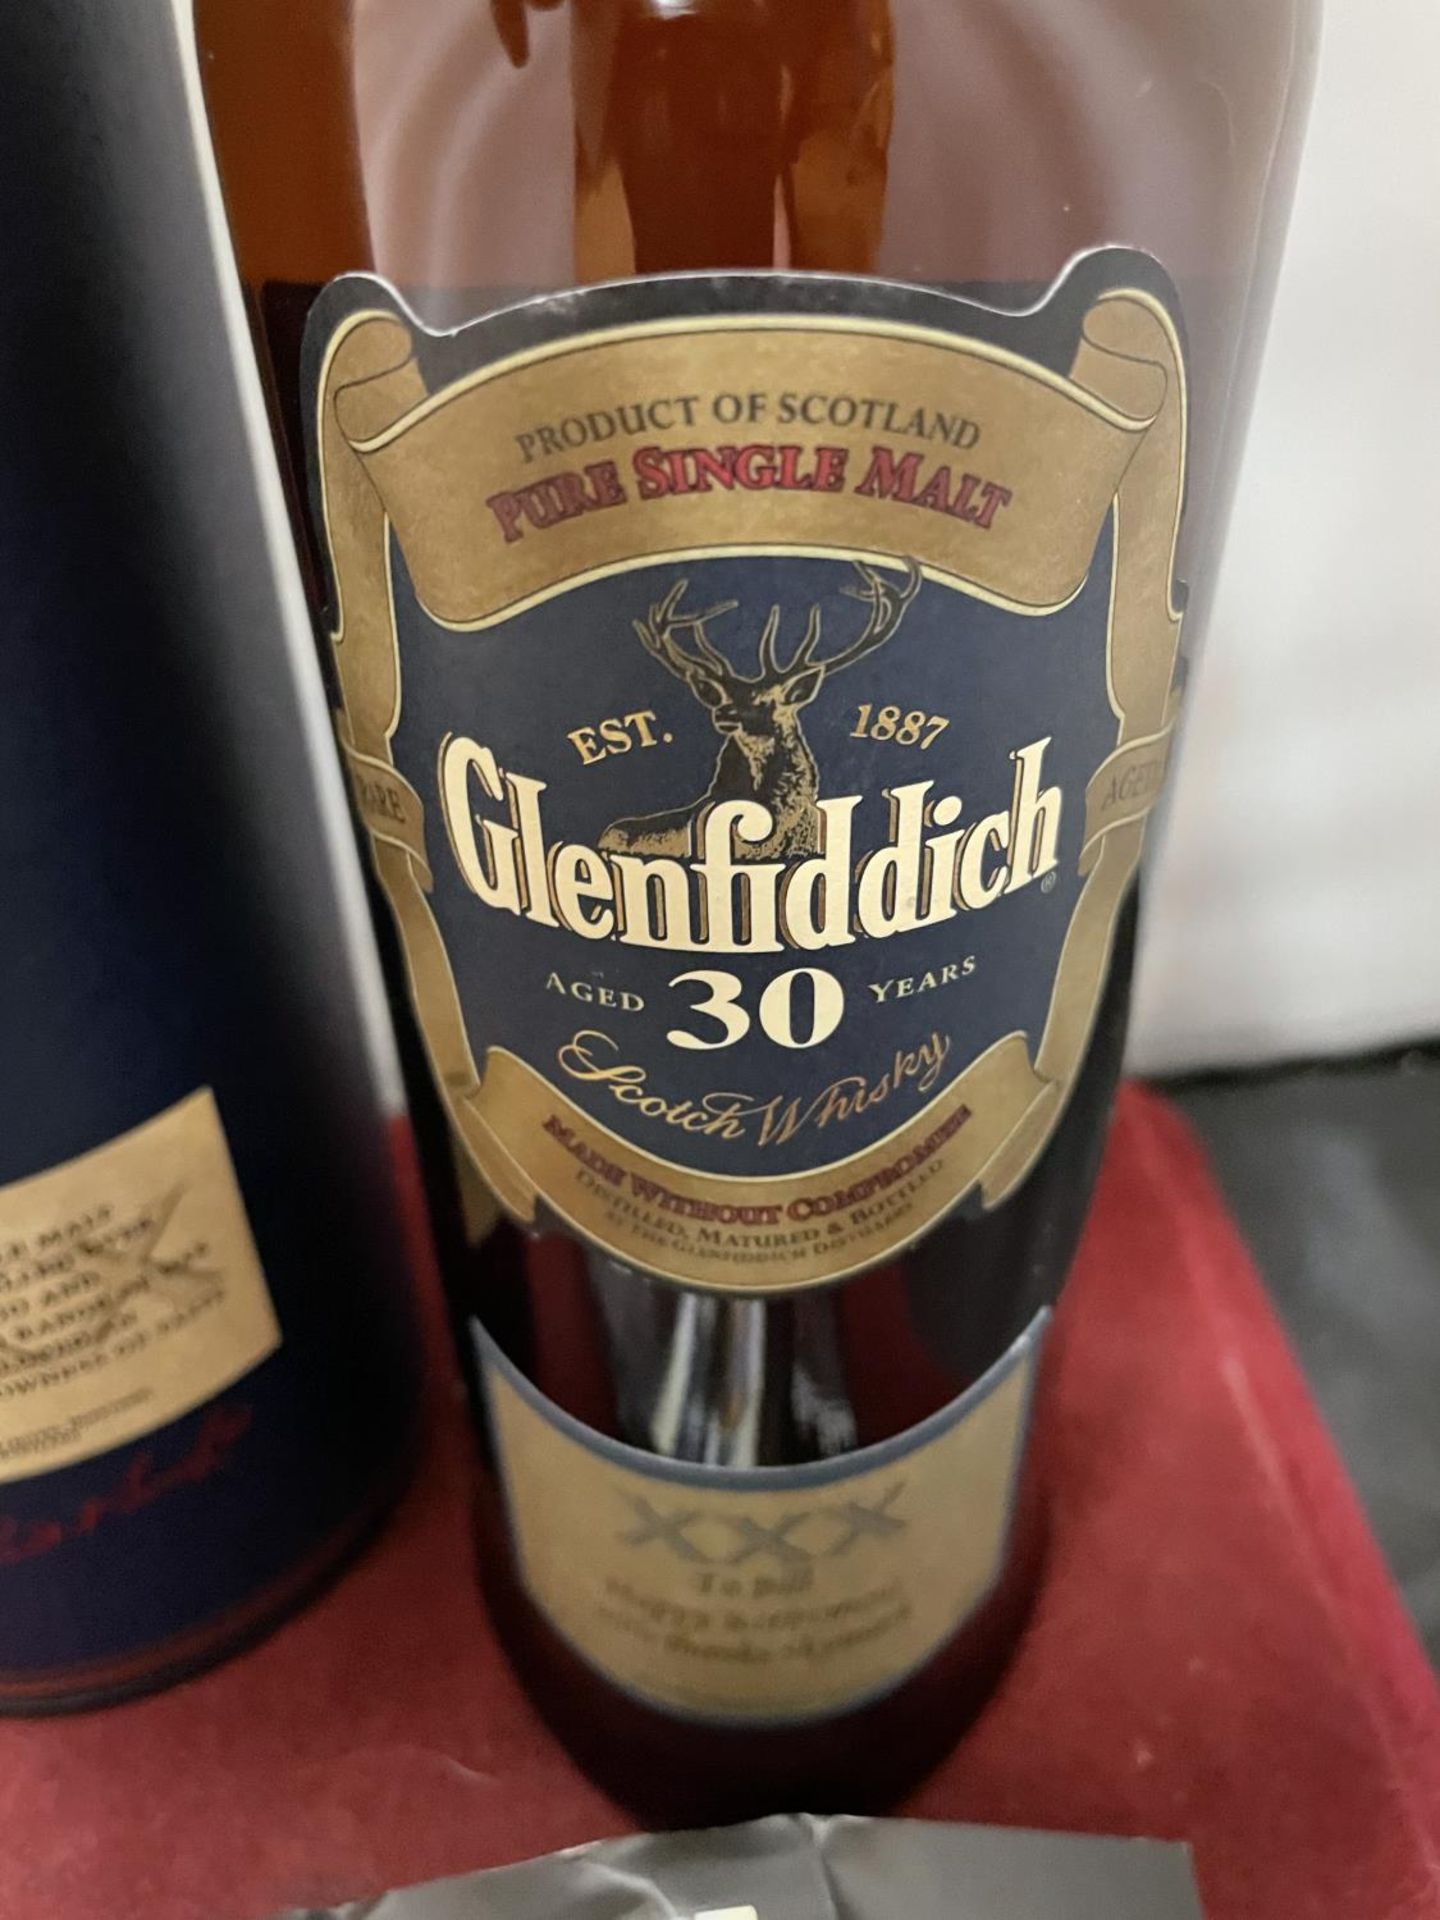 A 70 CL BOTTLE OF GLENFIDDICH AGED 30 YEARS SINGLE MALT - Image 2 of 4